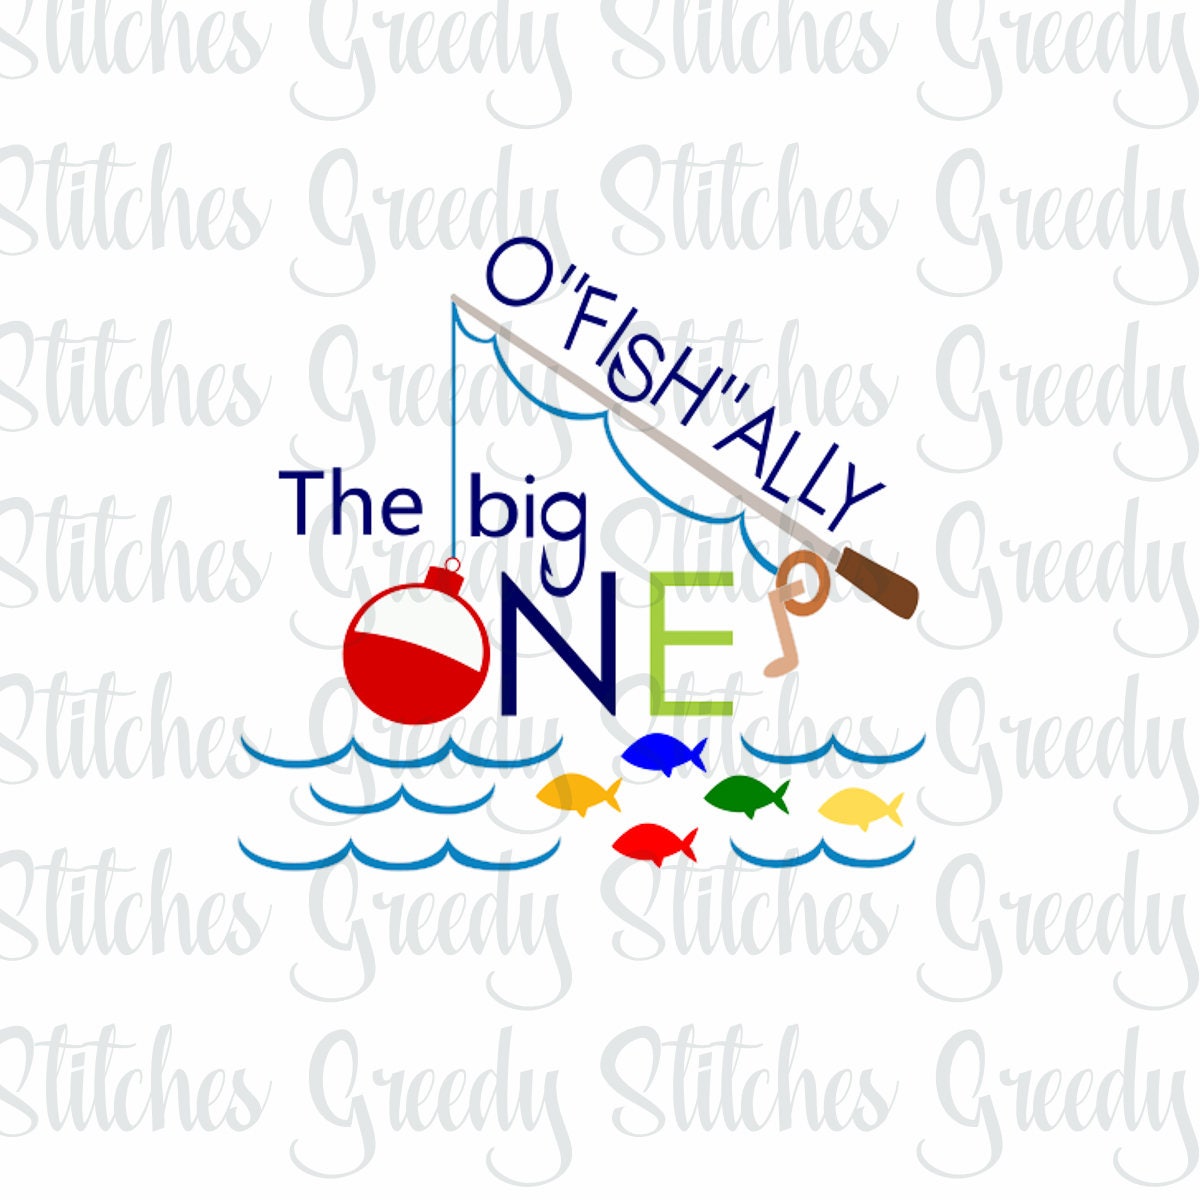 The Big One & O'fish'ally the Big One Svg, Dxf, Fcm, Eps, and Png. Instant  Download. Ofishally One SVG, the Big One SVG, Fish Svg. -  Israel